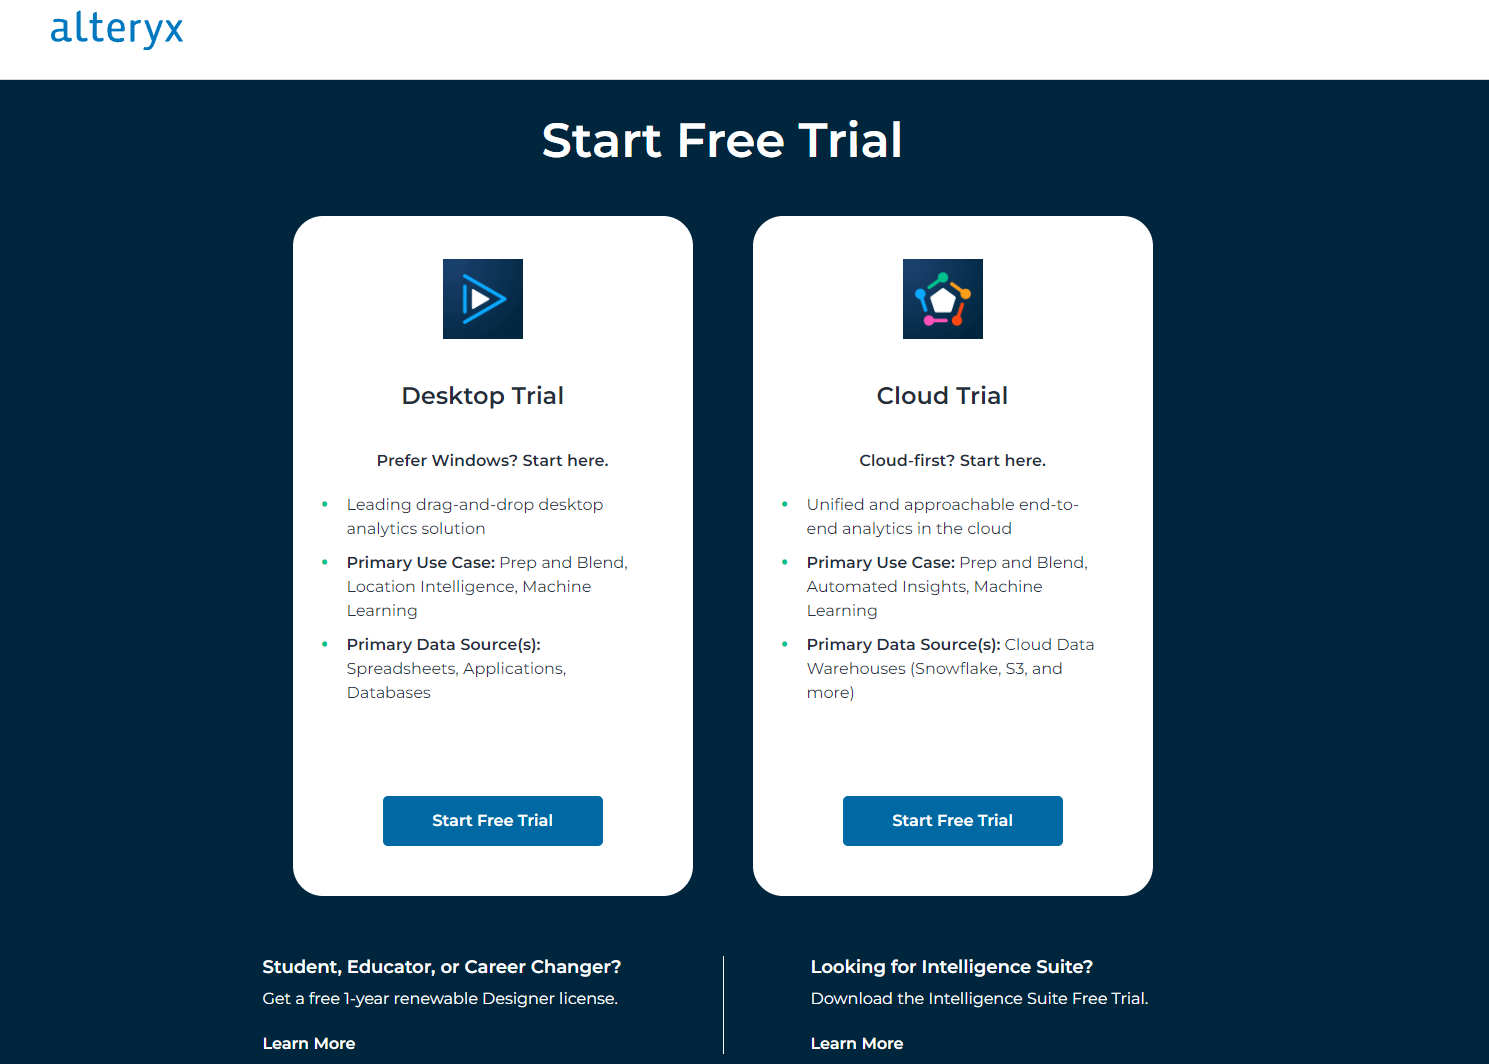 The free trial page for the Alteryx Analytics Cloud Platform